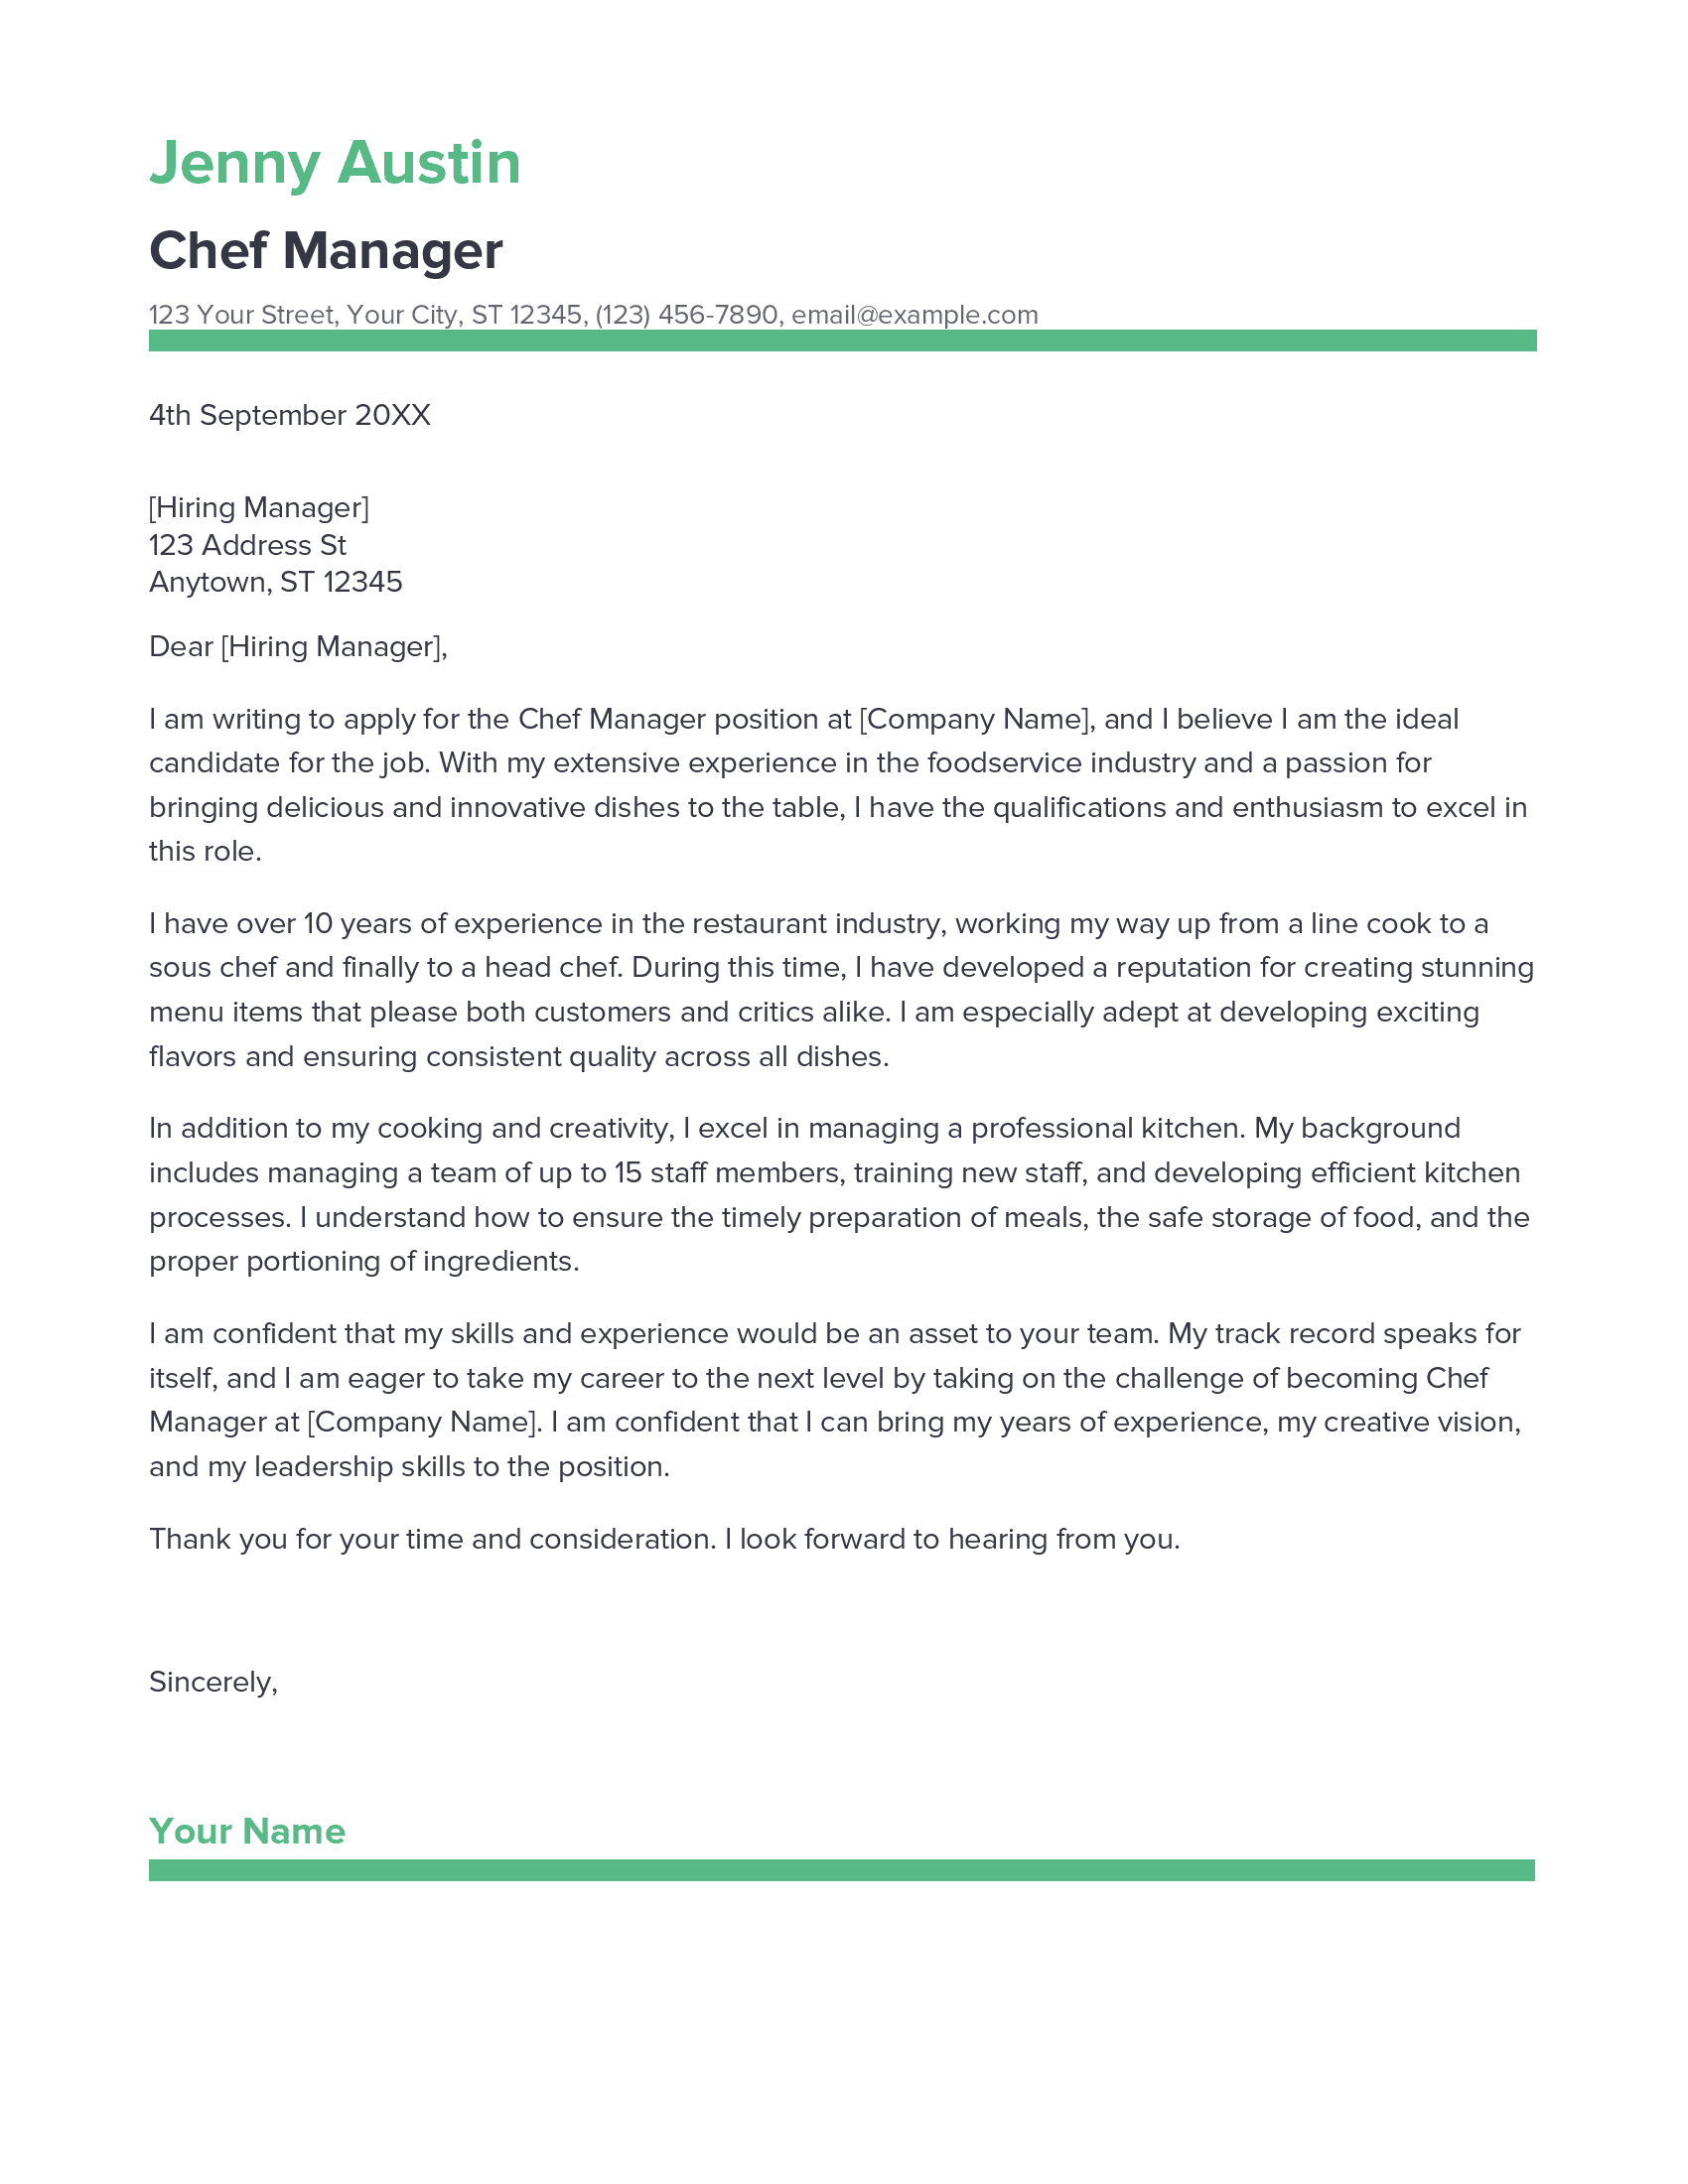 cover letter for chef manager